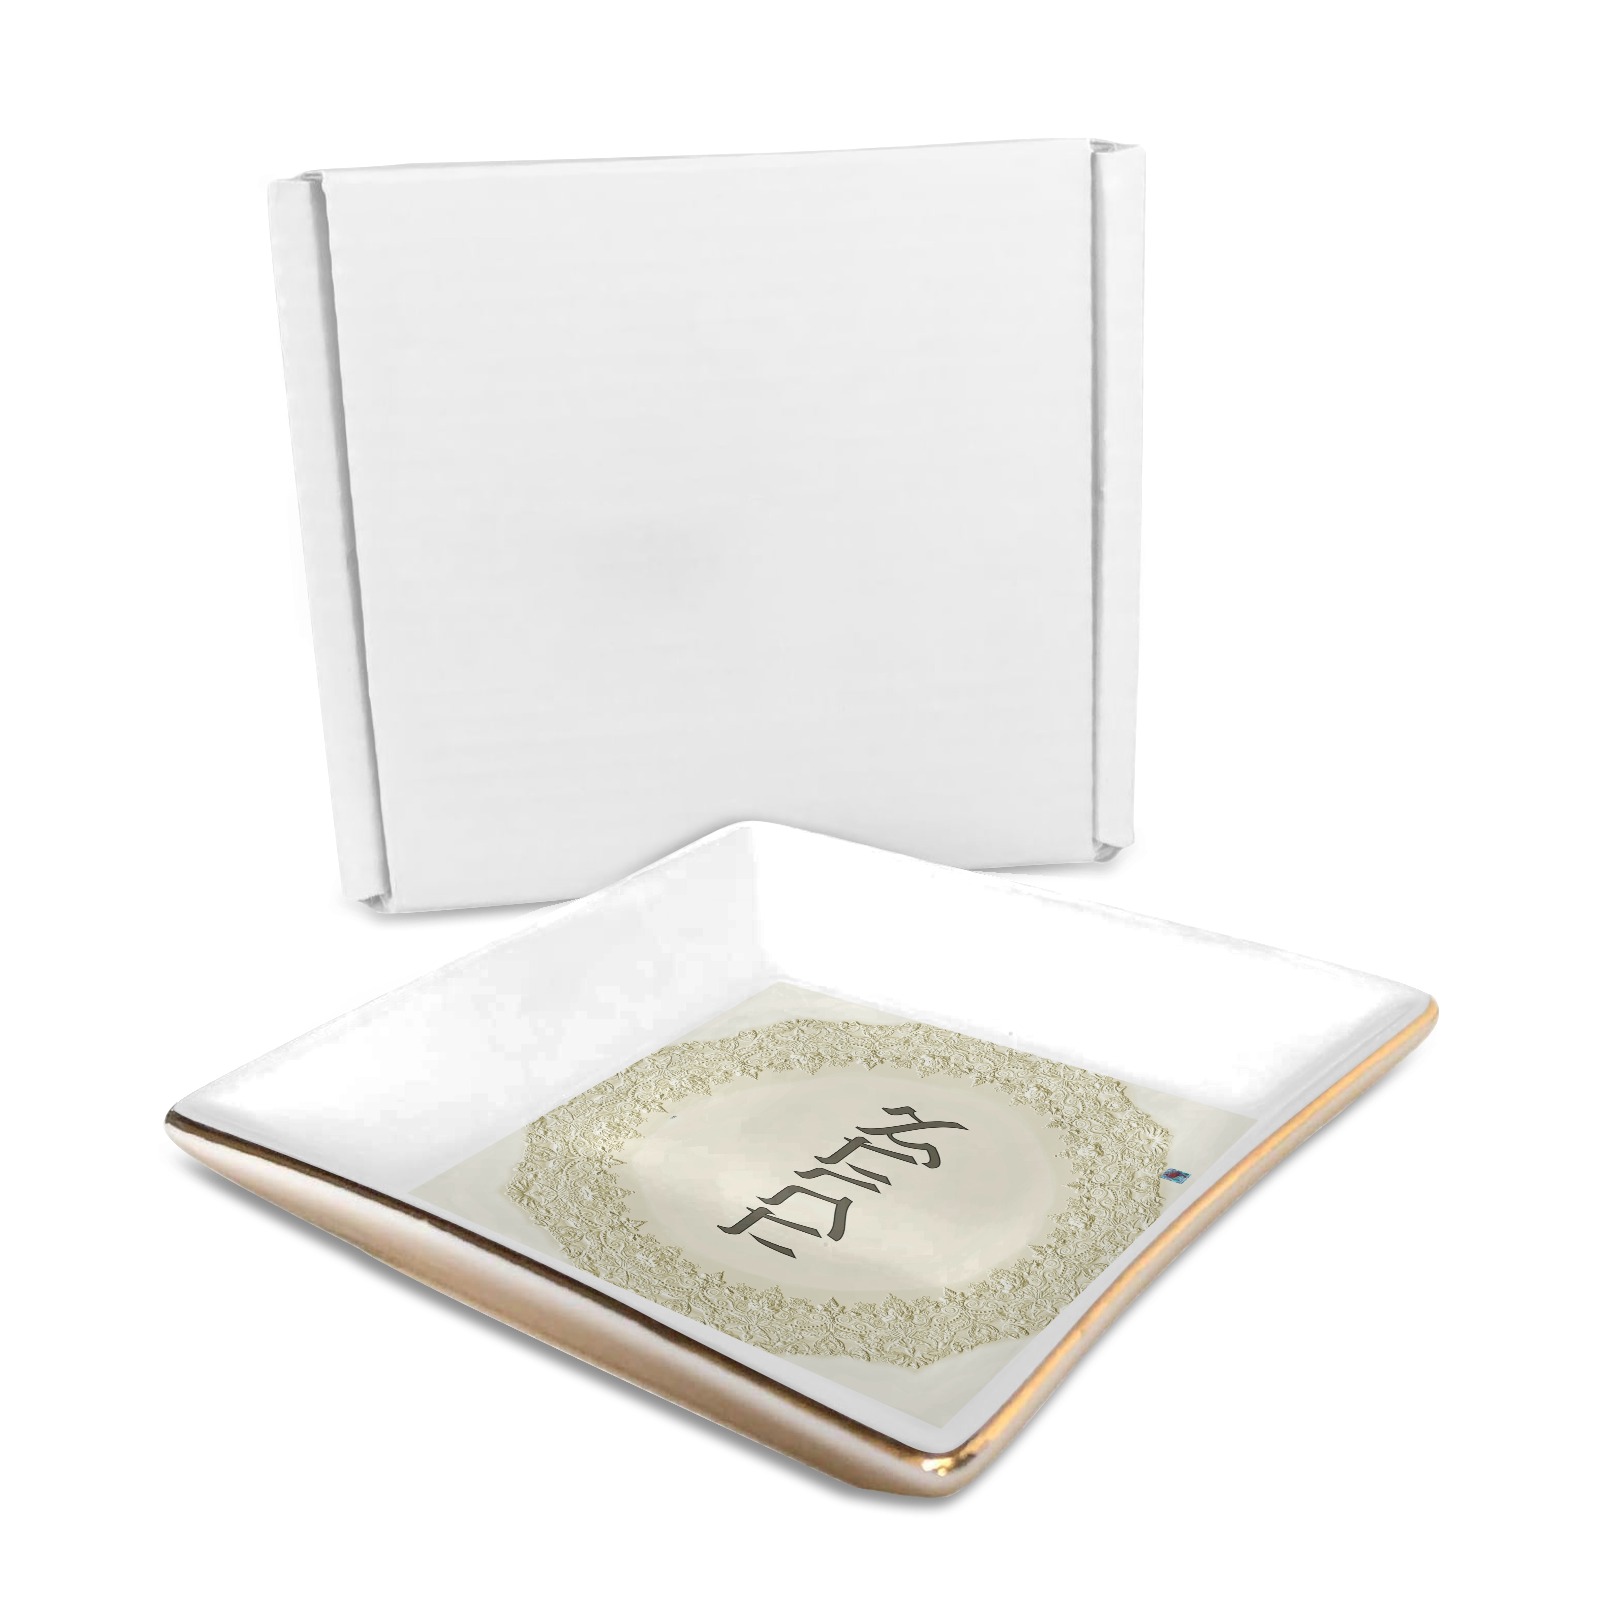 AHUVA-page001 Square Jewelry Tray with Golden Edge